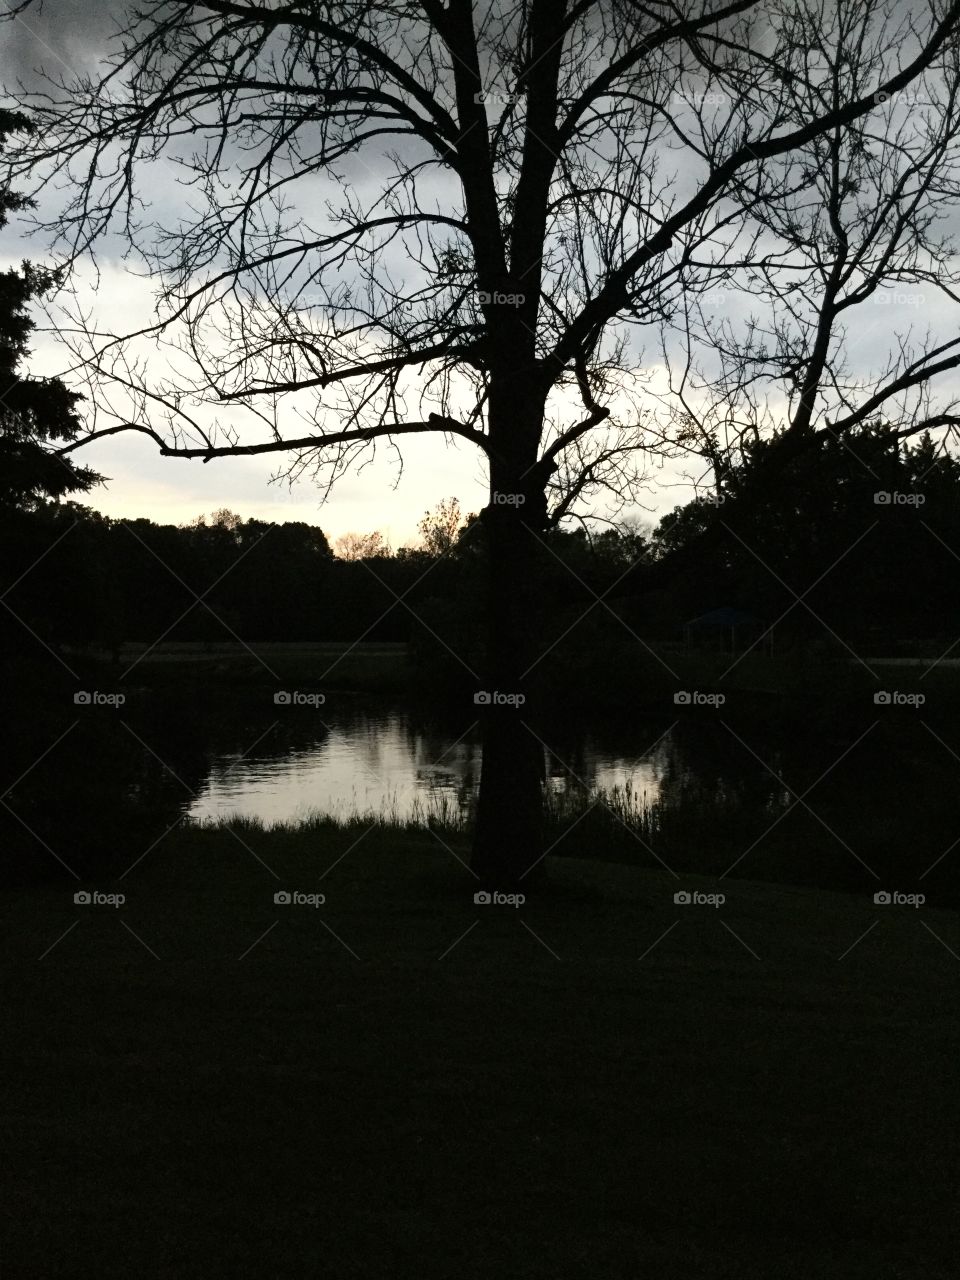 The pond before a thunderstorm 